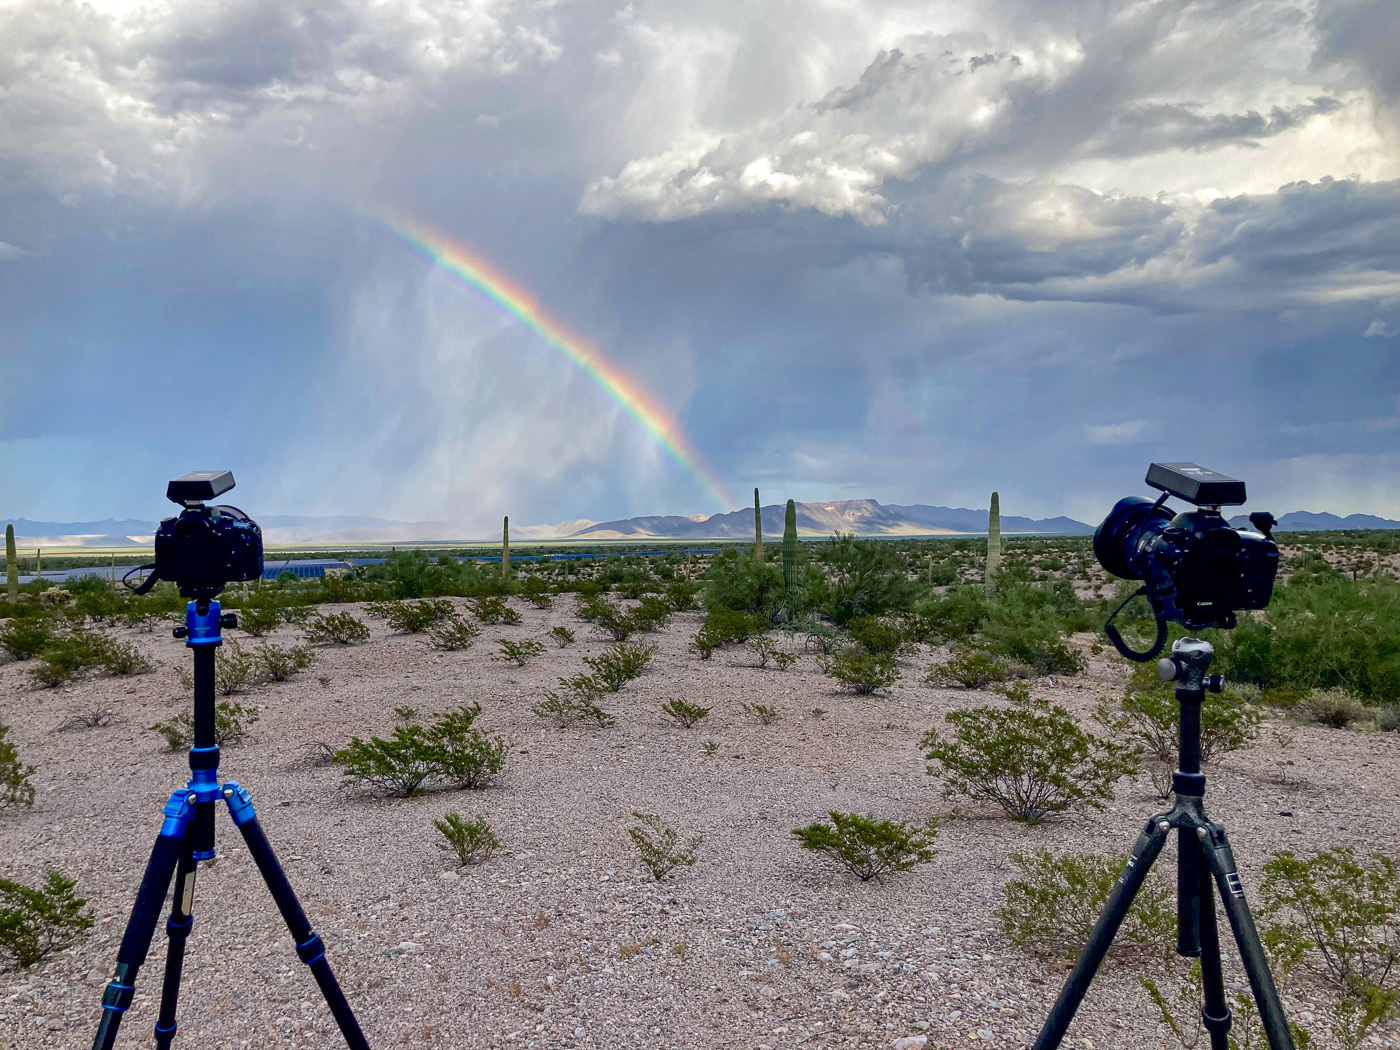 Image shows two cameras on tripods in the foreground, both pointed across a desert landscape toward a sunlit mountain range with a large rainbow arcing out of white and gray storm clouds.